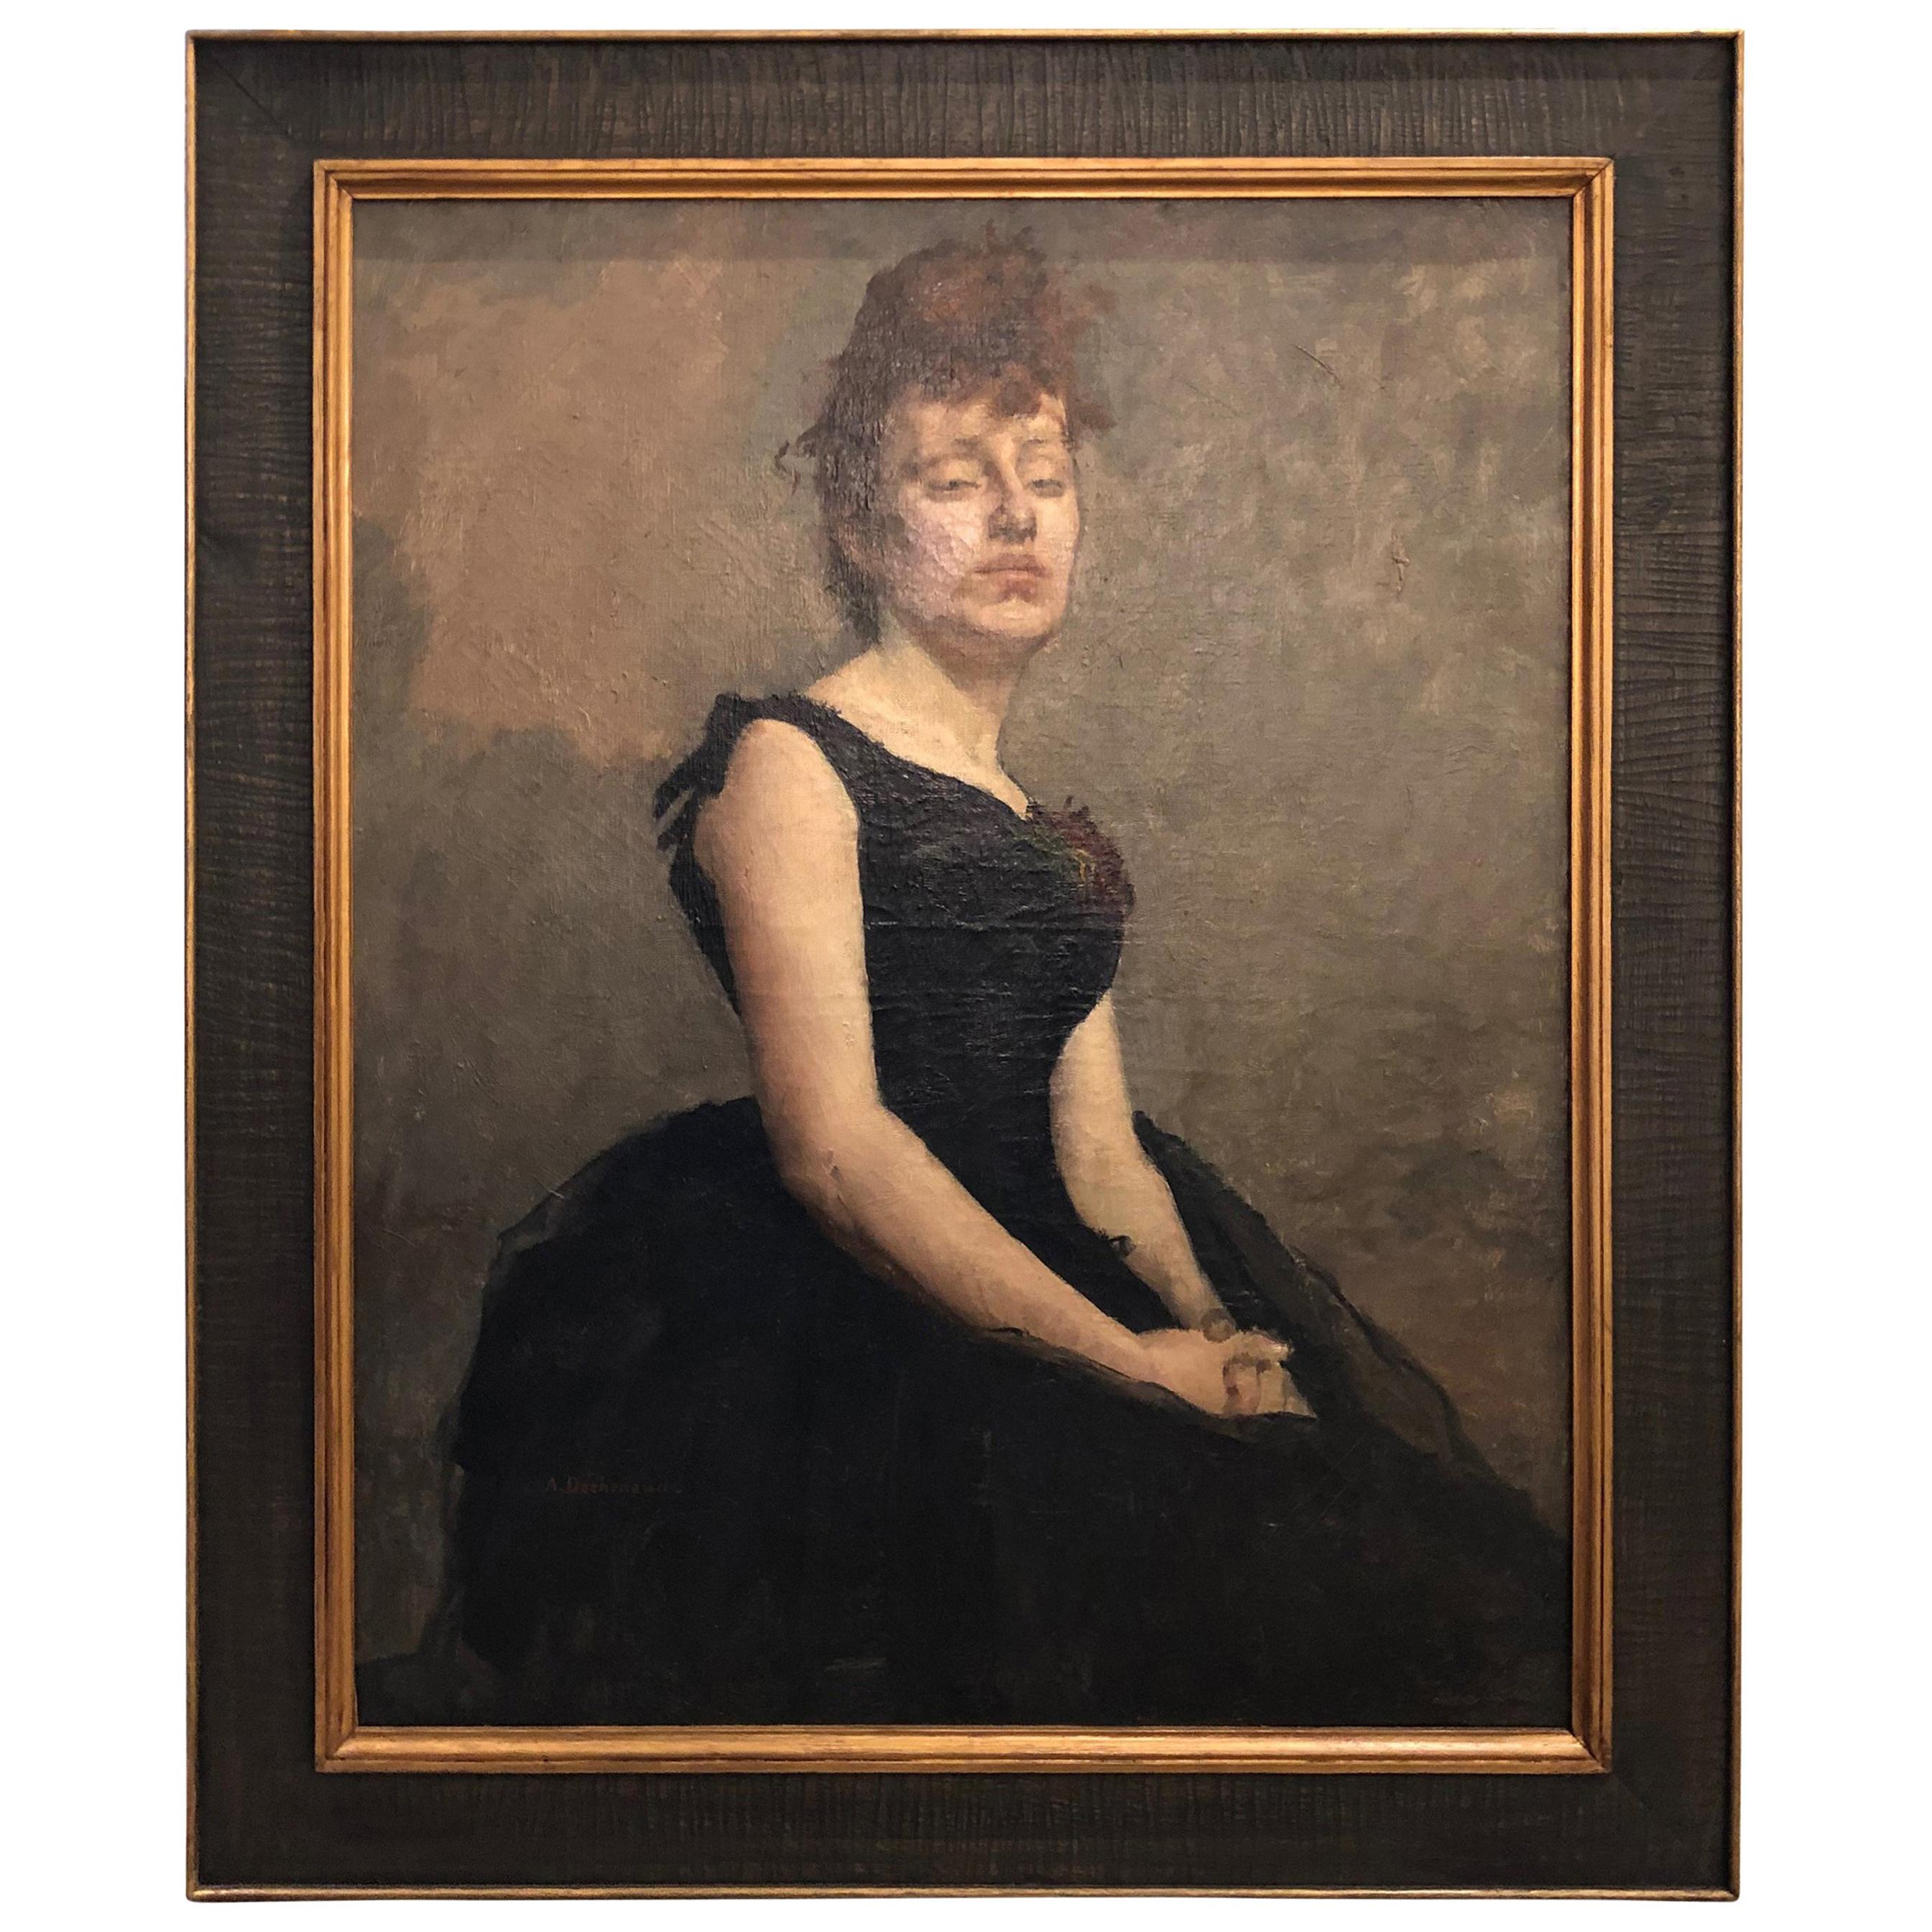 19th Century Portrait by Adolphe "Dechenaud" For Sale